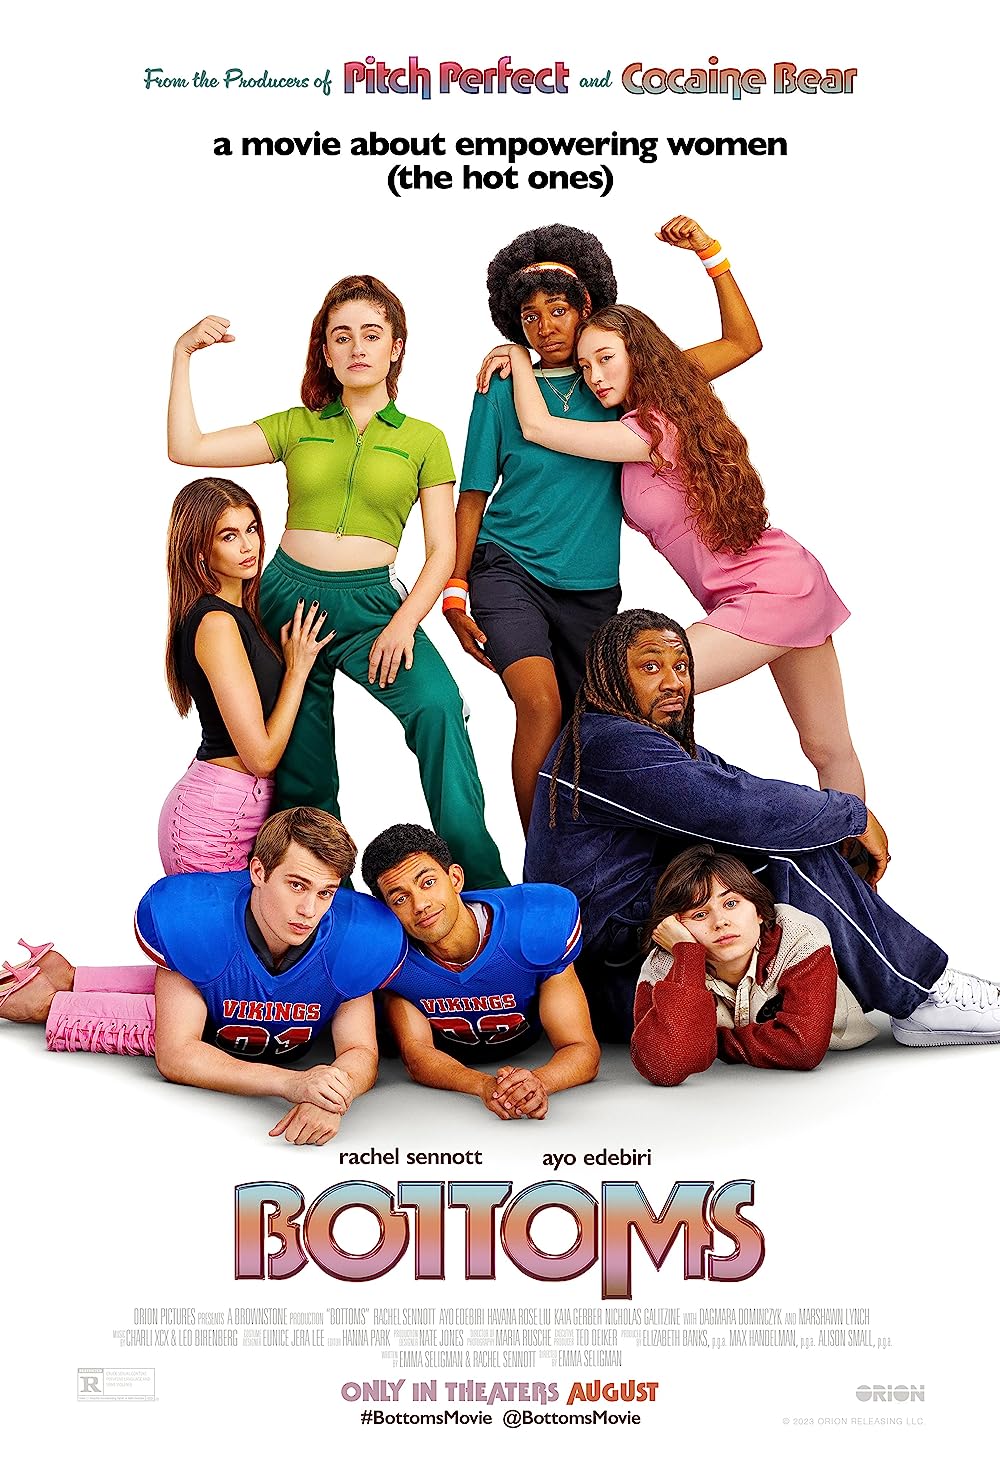 The "Bottoms" poster which includes PJ, a white girl in green making a muscle, and Josie, a black woman in teal making a muscle. Clinging to each of them is a young white woman and a young Wasian woman both wearing pink clothing items. Two football players lounge beneath them, another white woman and a Black man.